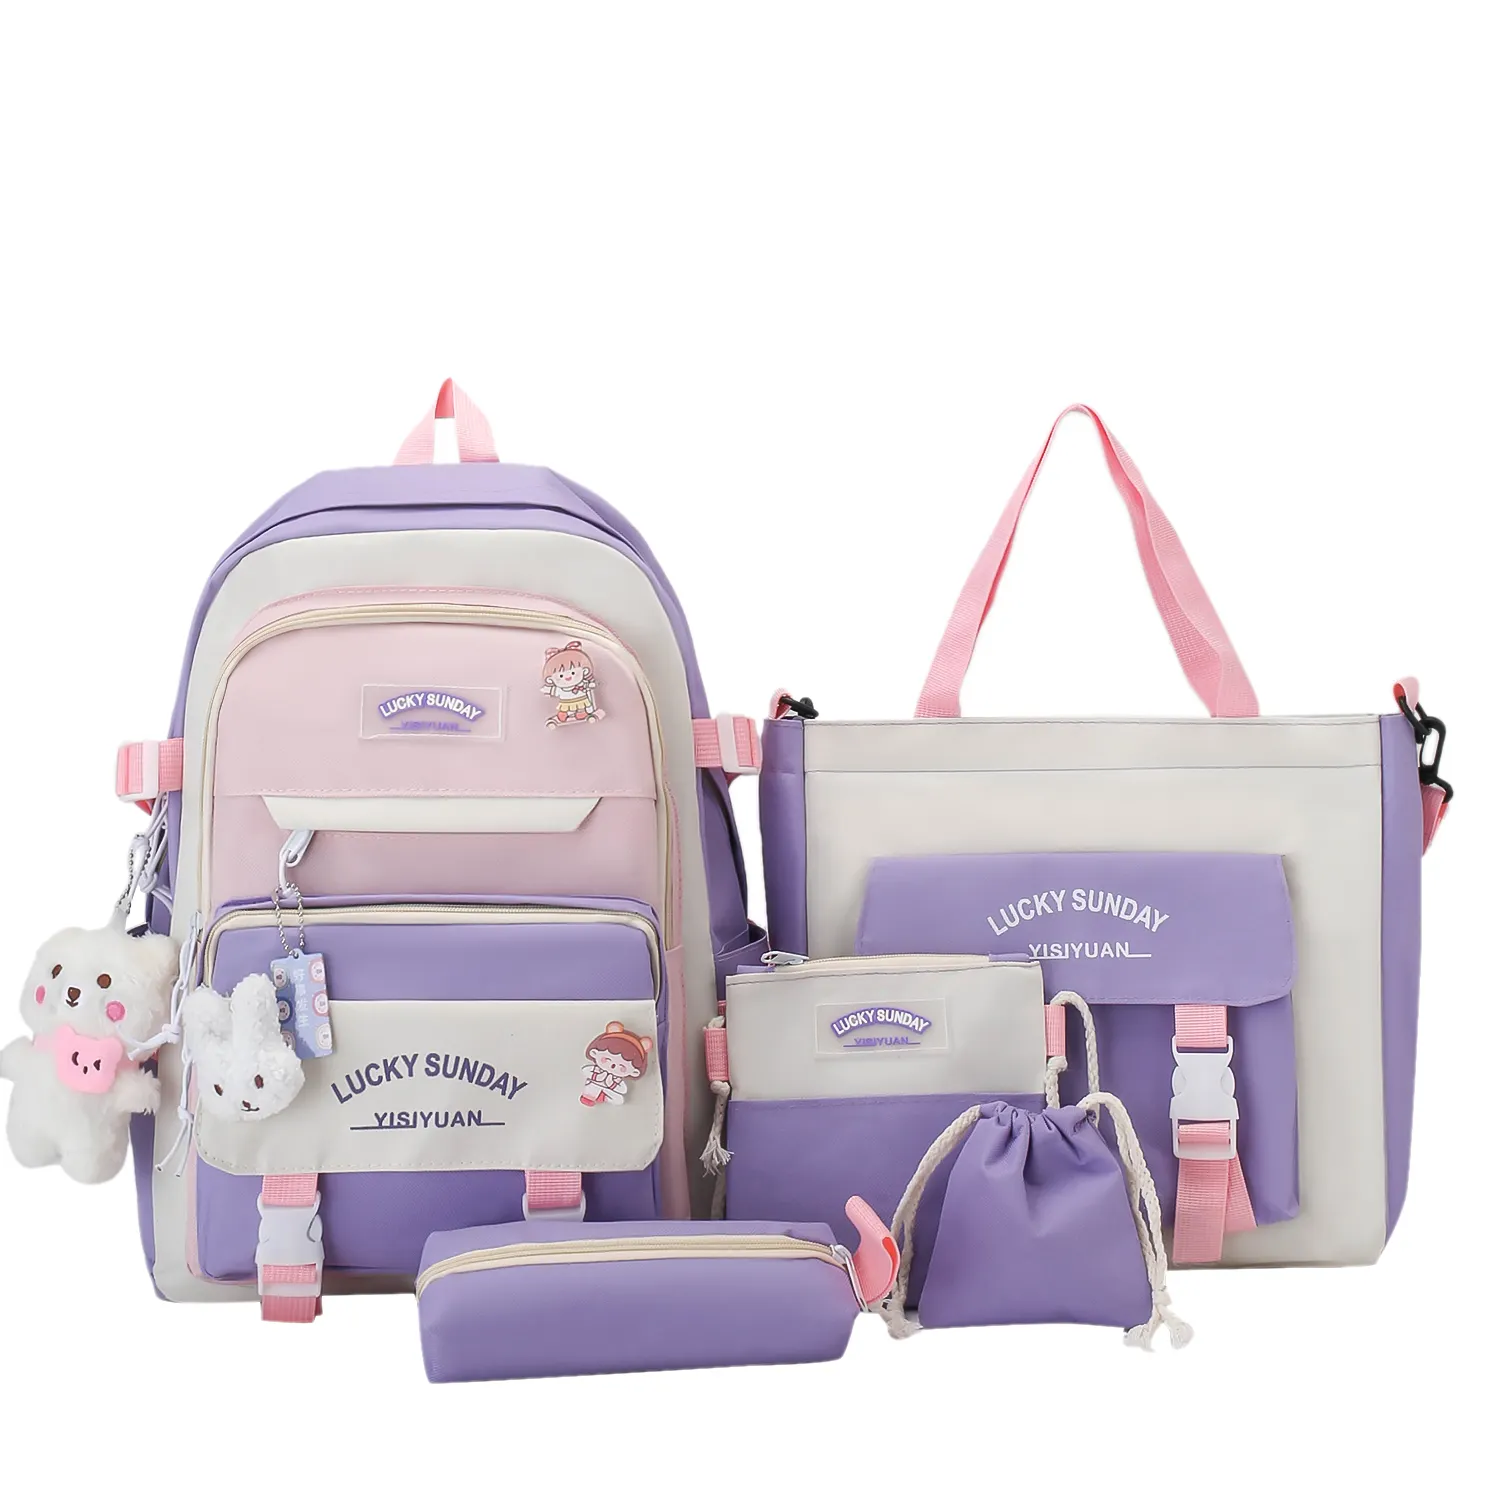 Cute 5 pieces in 1 set of fashionable ladies handbags backpacks for girls Travel learning backpack